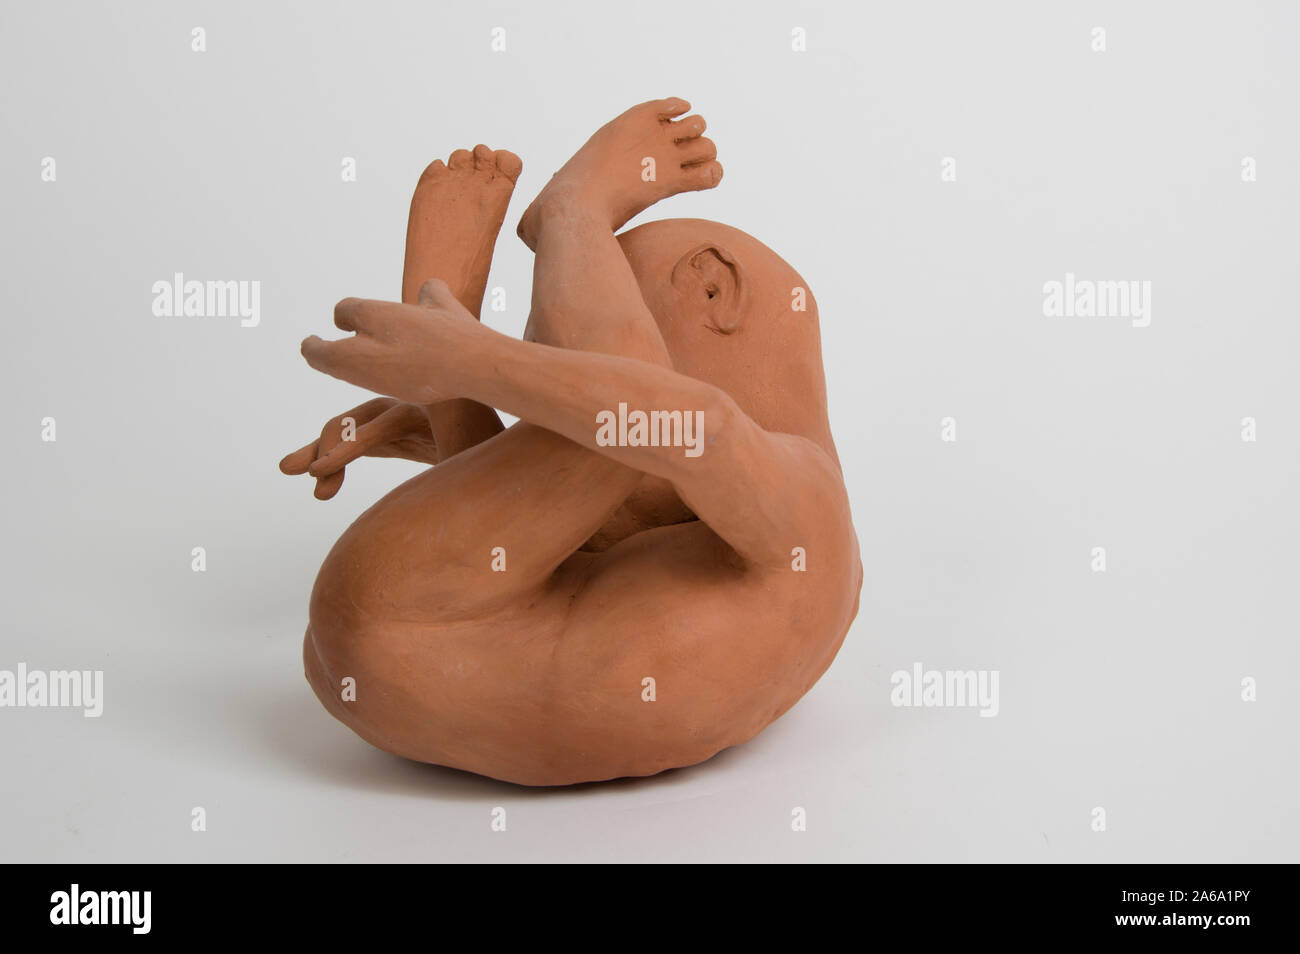 Clay figure of a newborn baby curled up in a fetal position Stock Photo